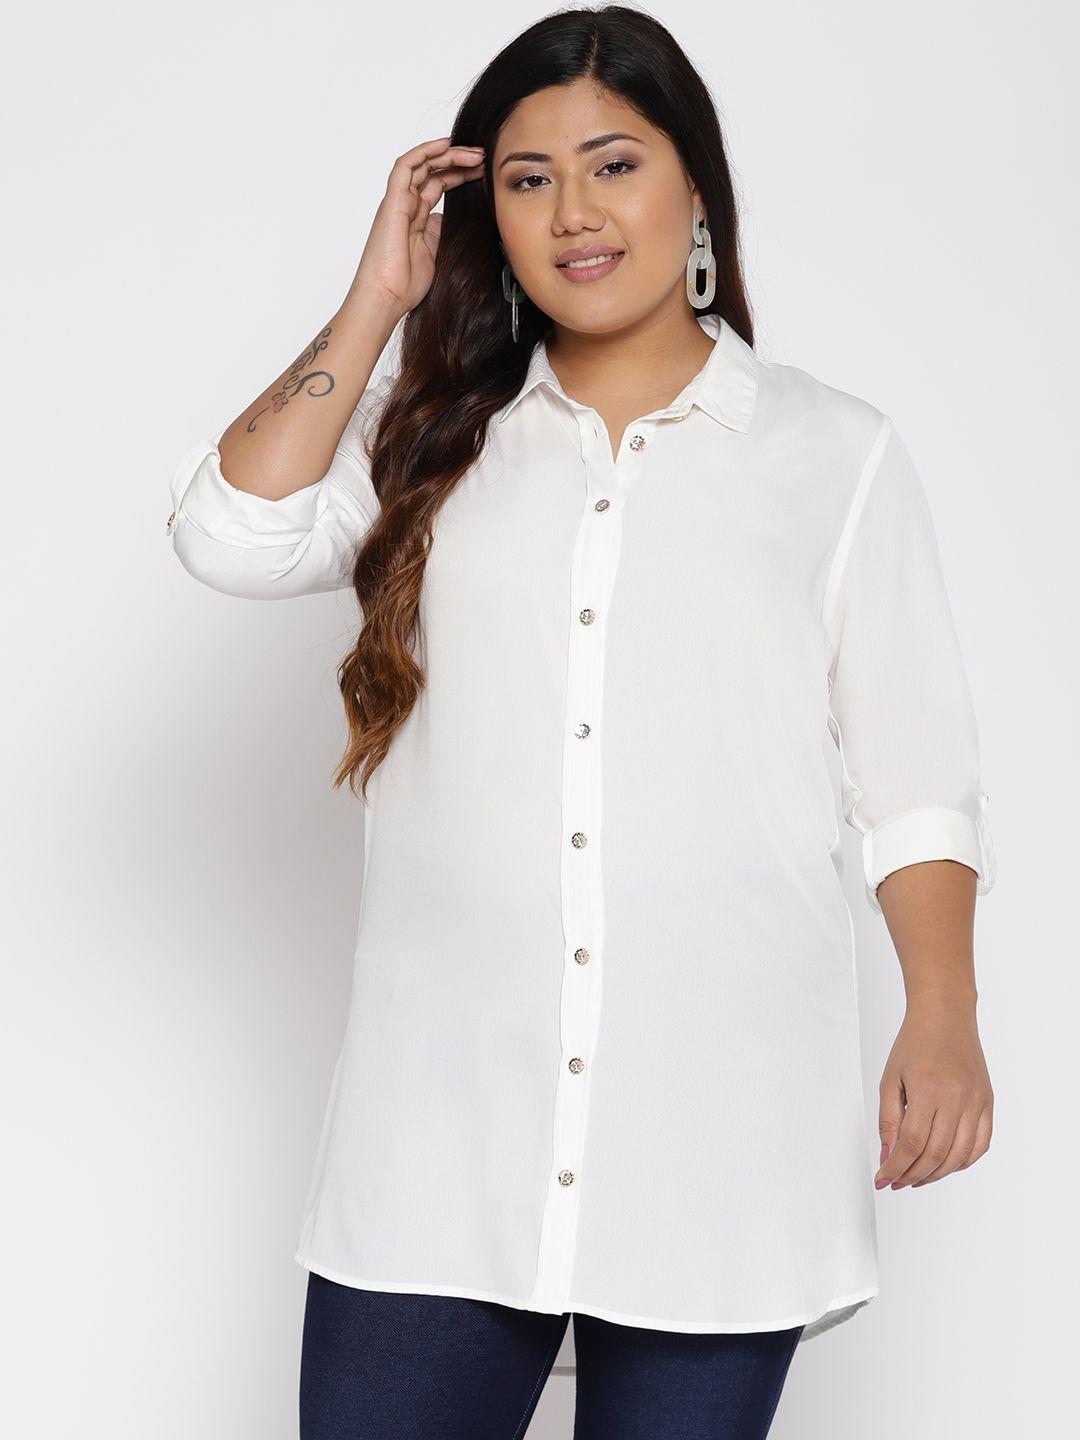 The Pink Moon Plus Size Women Off-White Regular Fit Solid Casual Shirt